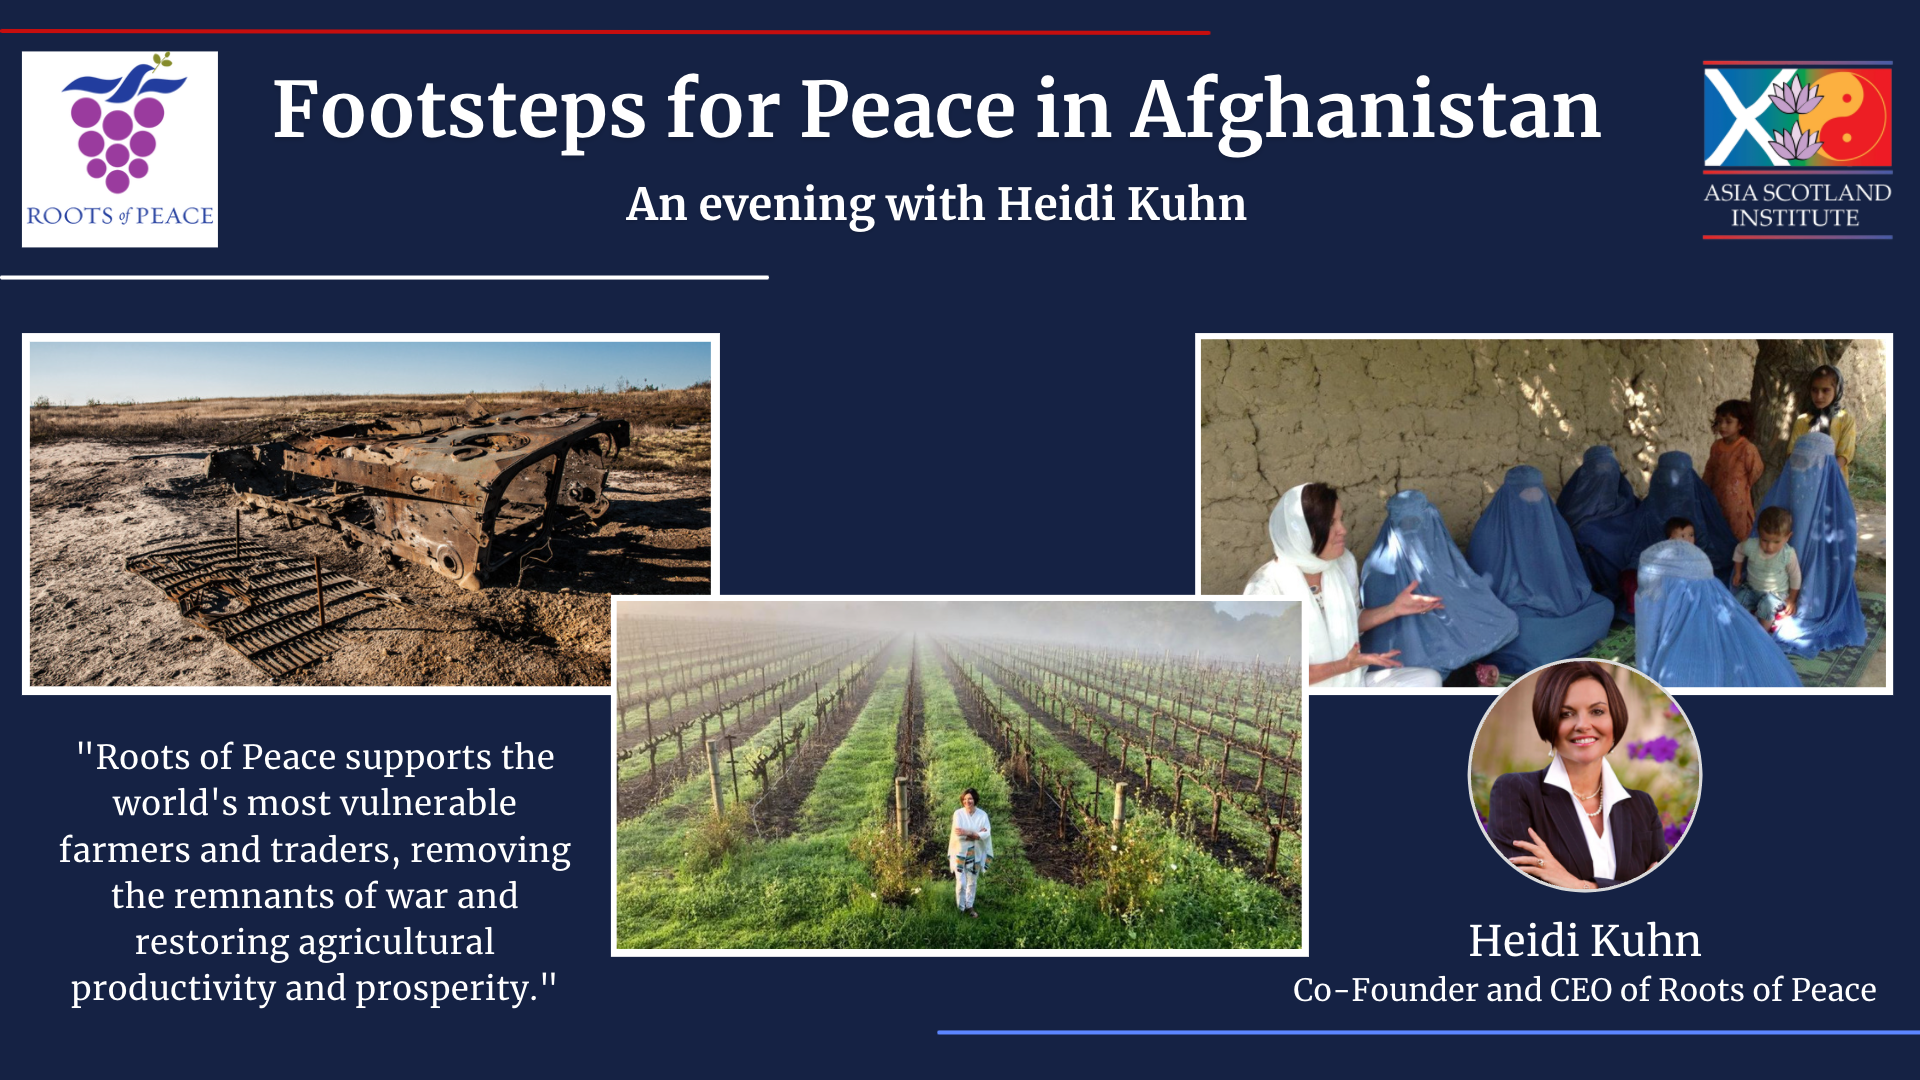 Footsteps for Peace in Afghanistan 1920 × 1080